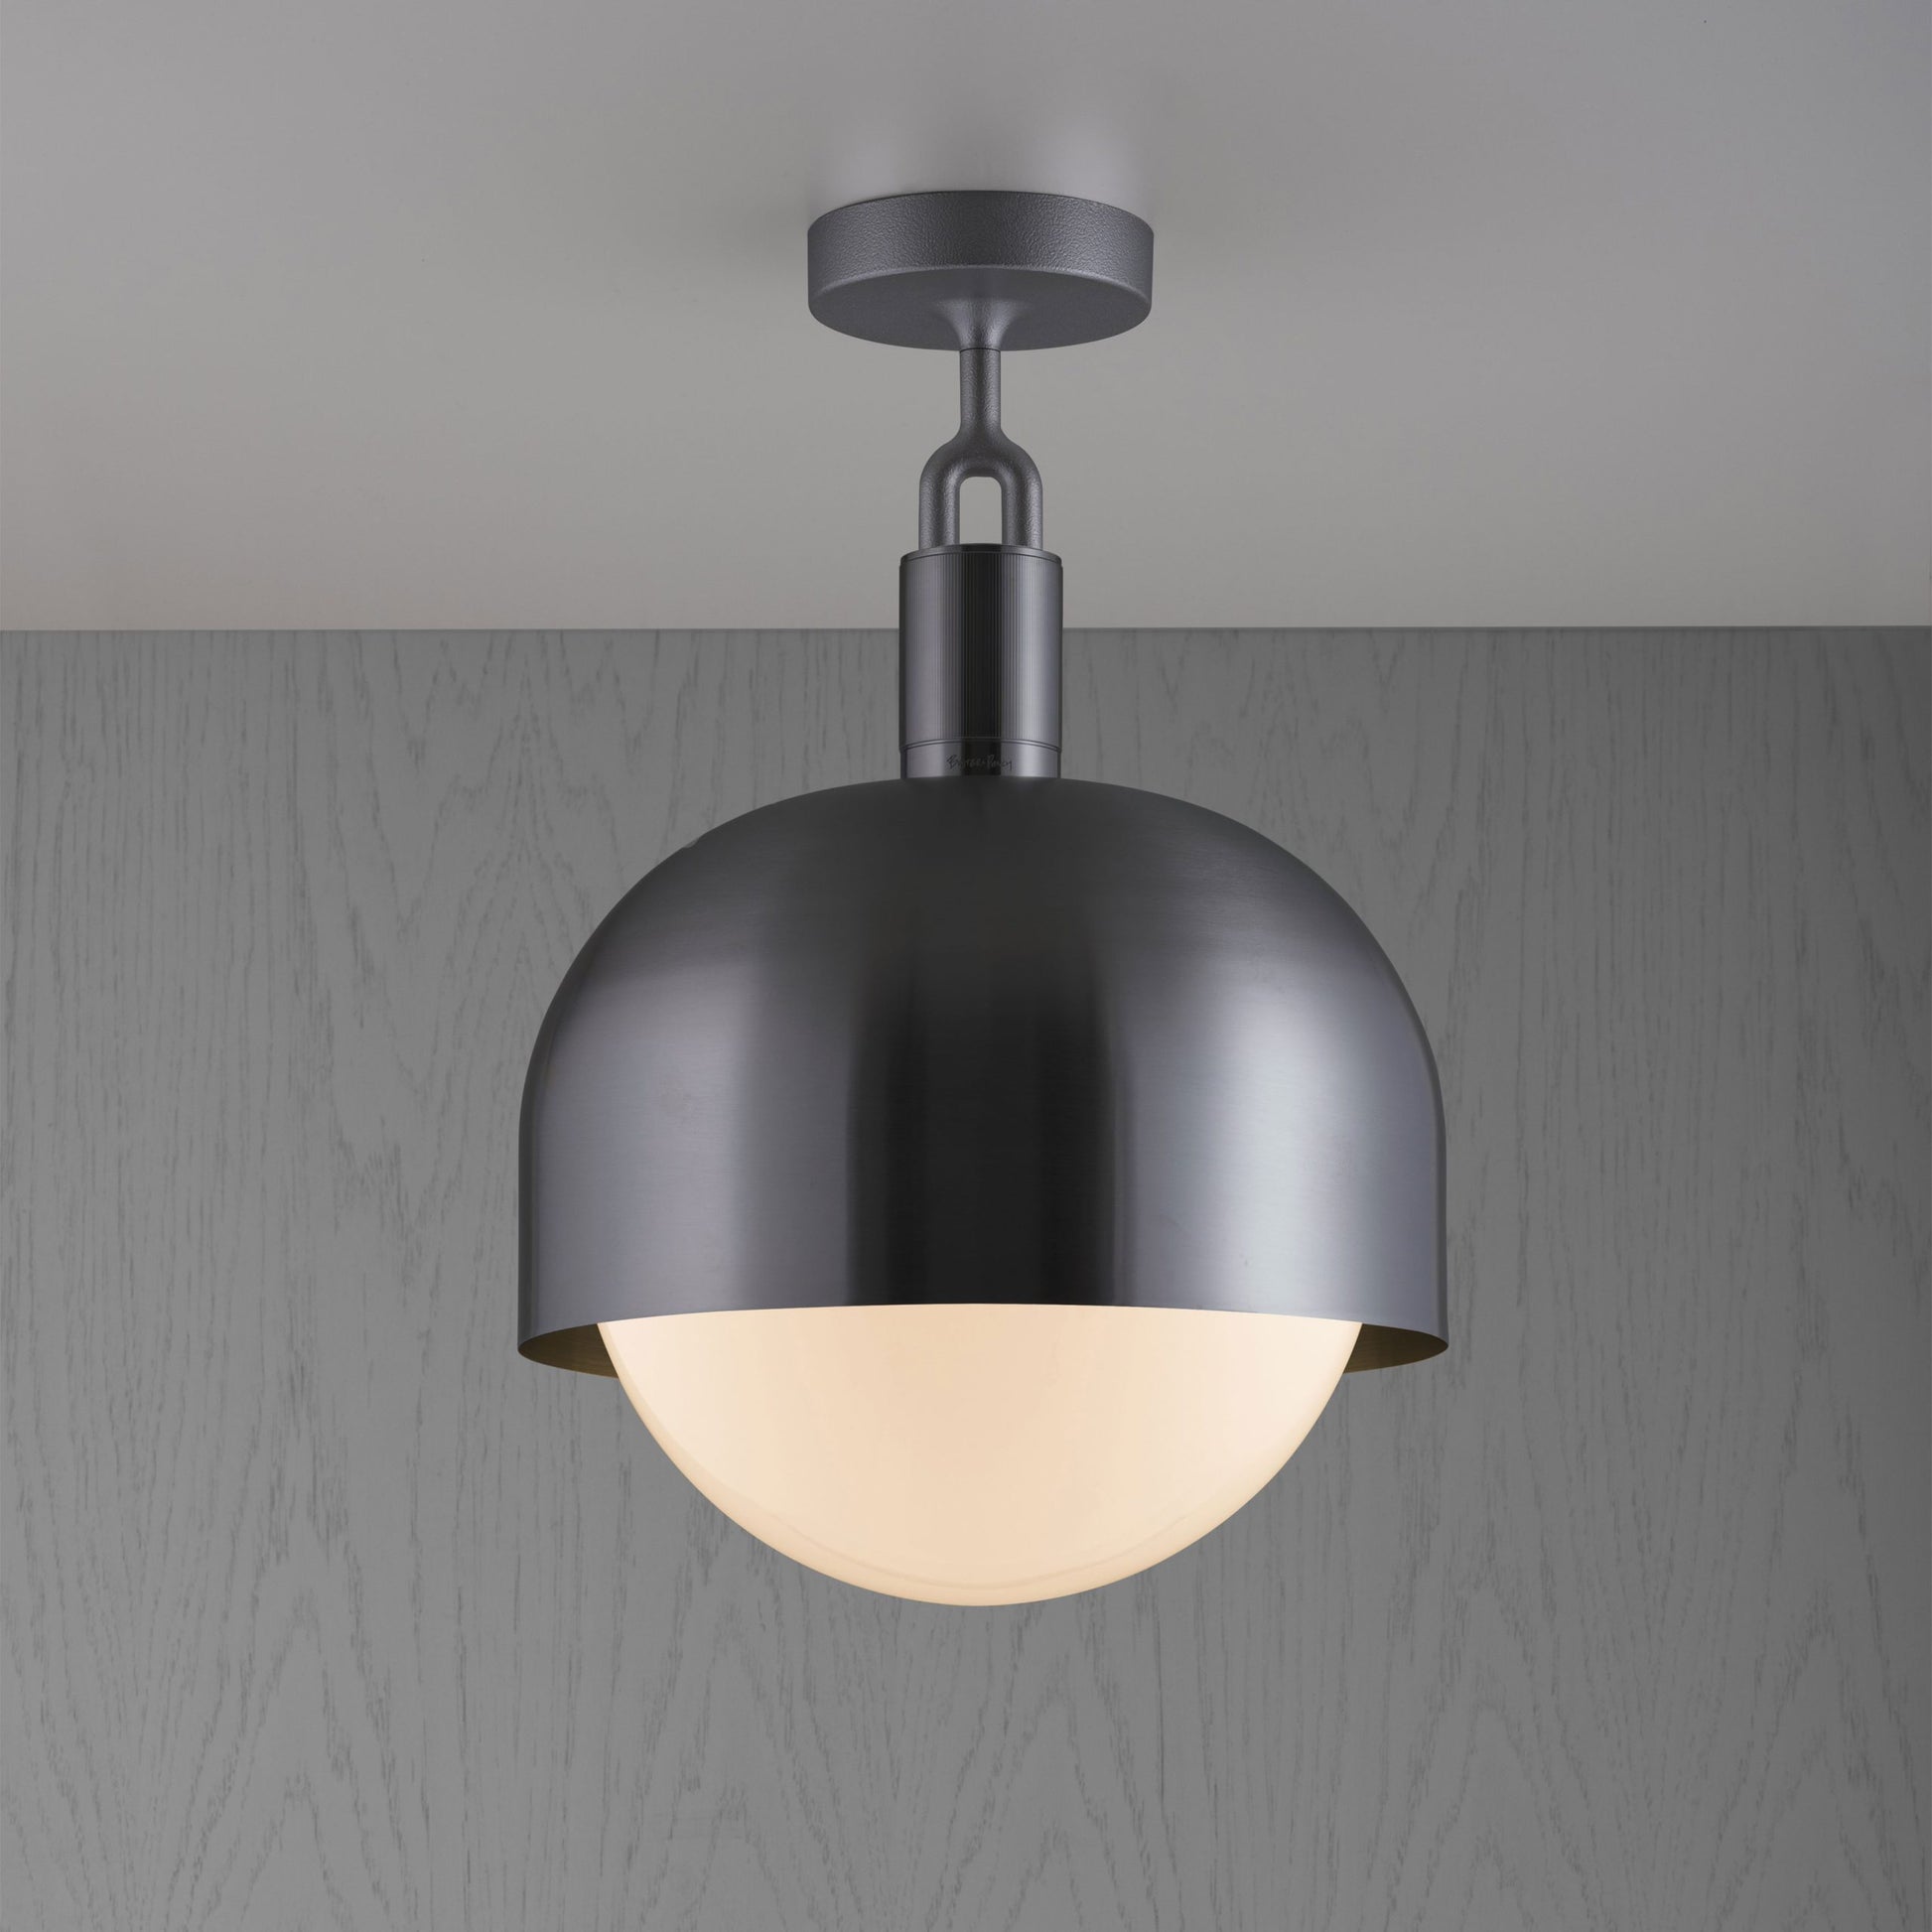 Forked Ceiling Light / Shade / Globe / Opal / Large Gun metal, front view.